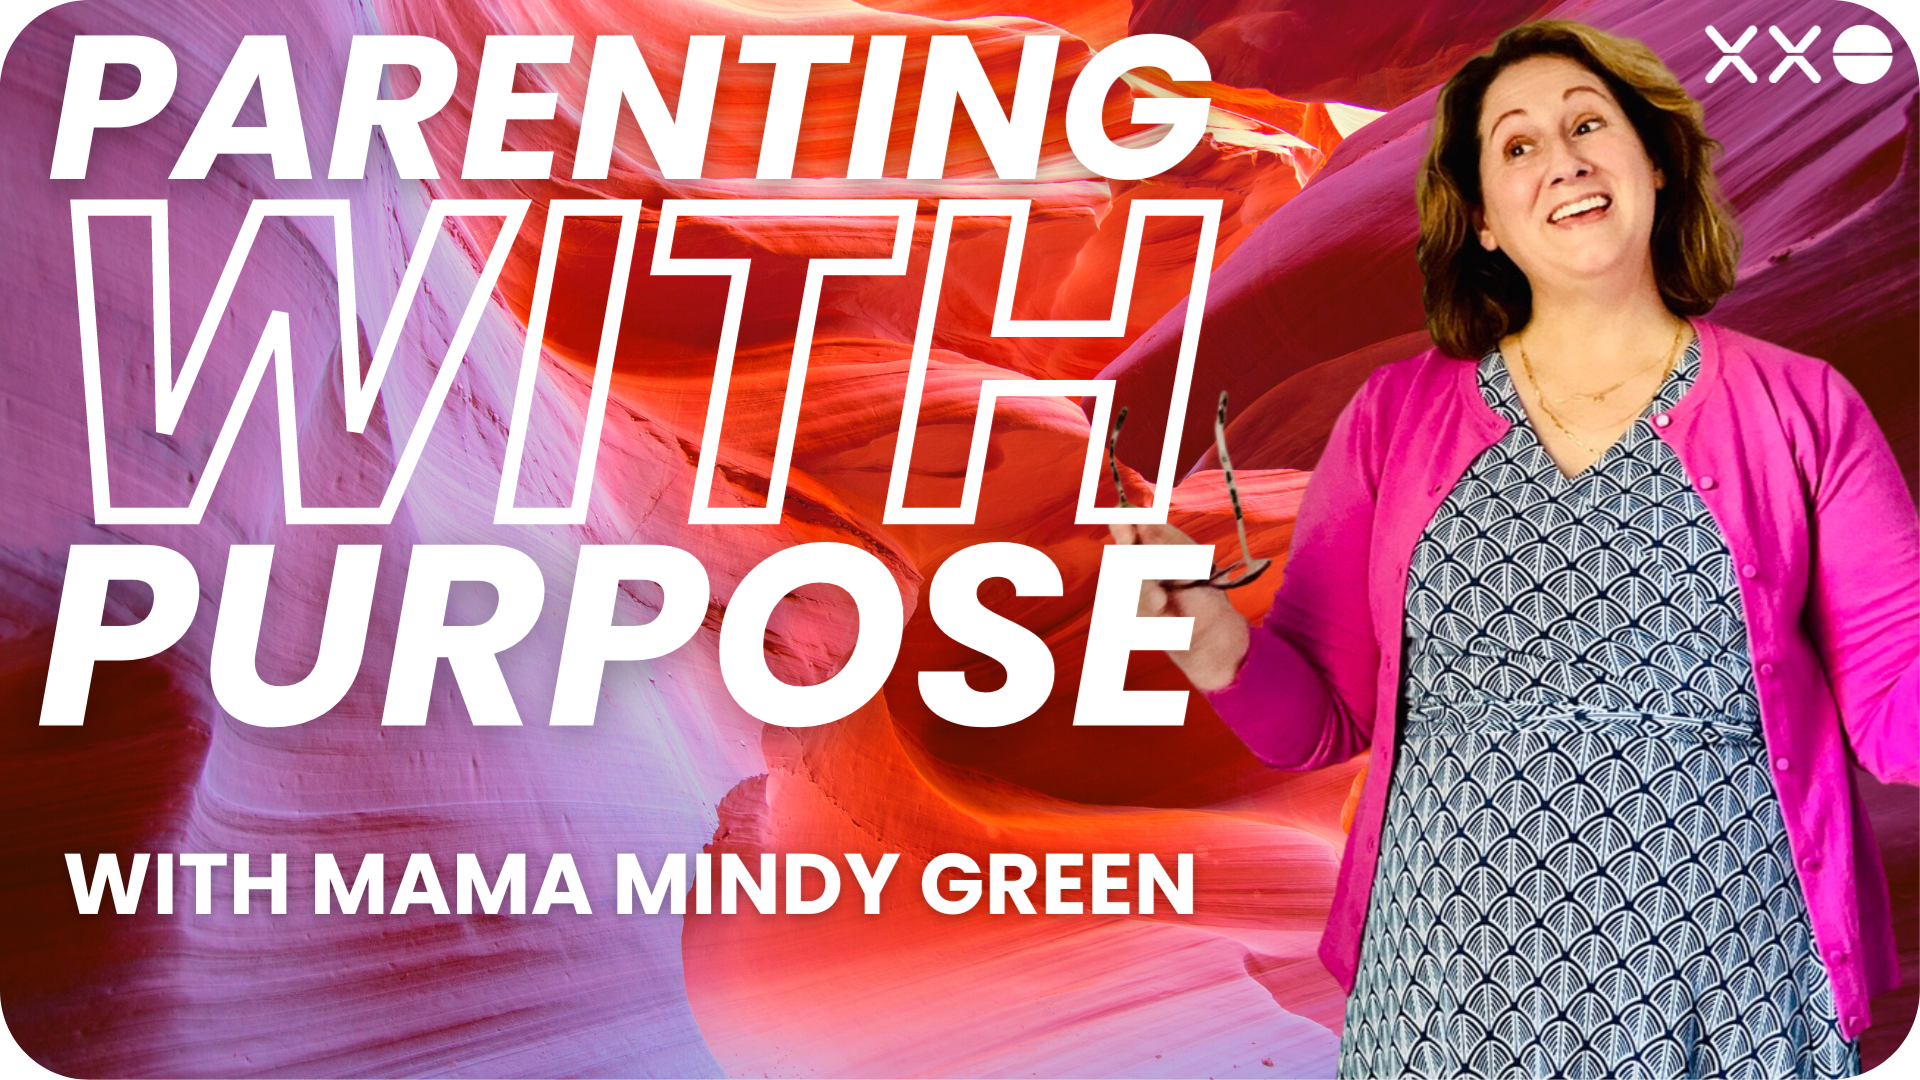 XXO CONNECT MAMA MINDY GREEN PARENTING WITH PURPOSE.png